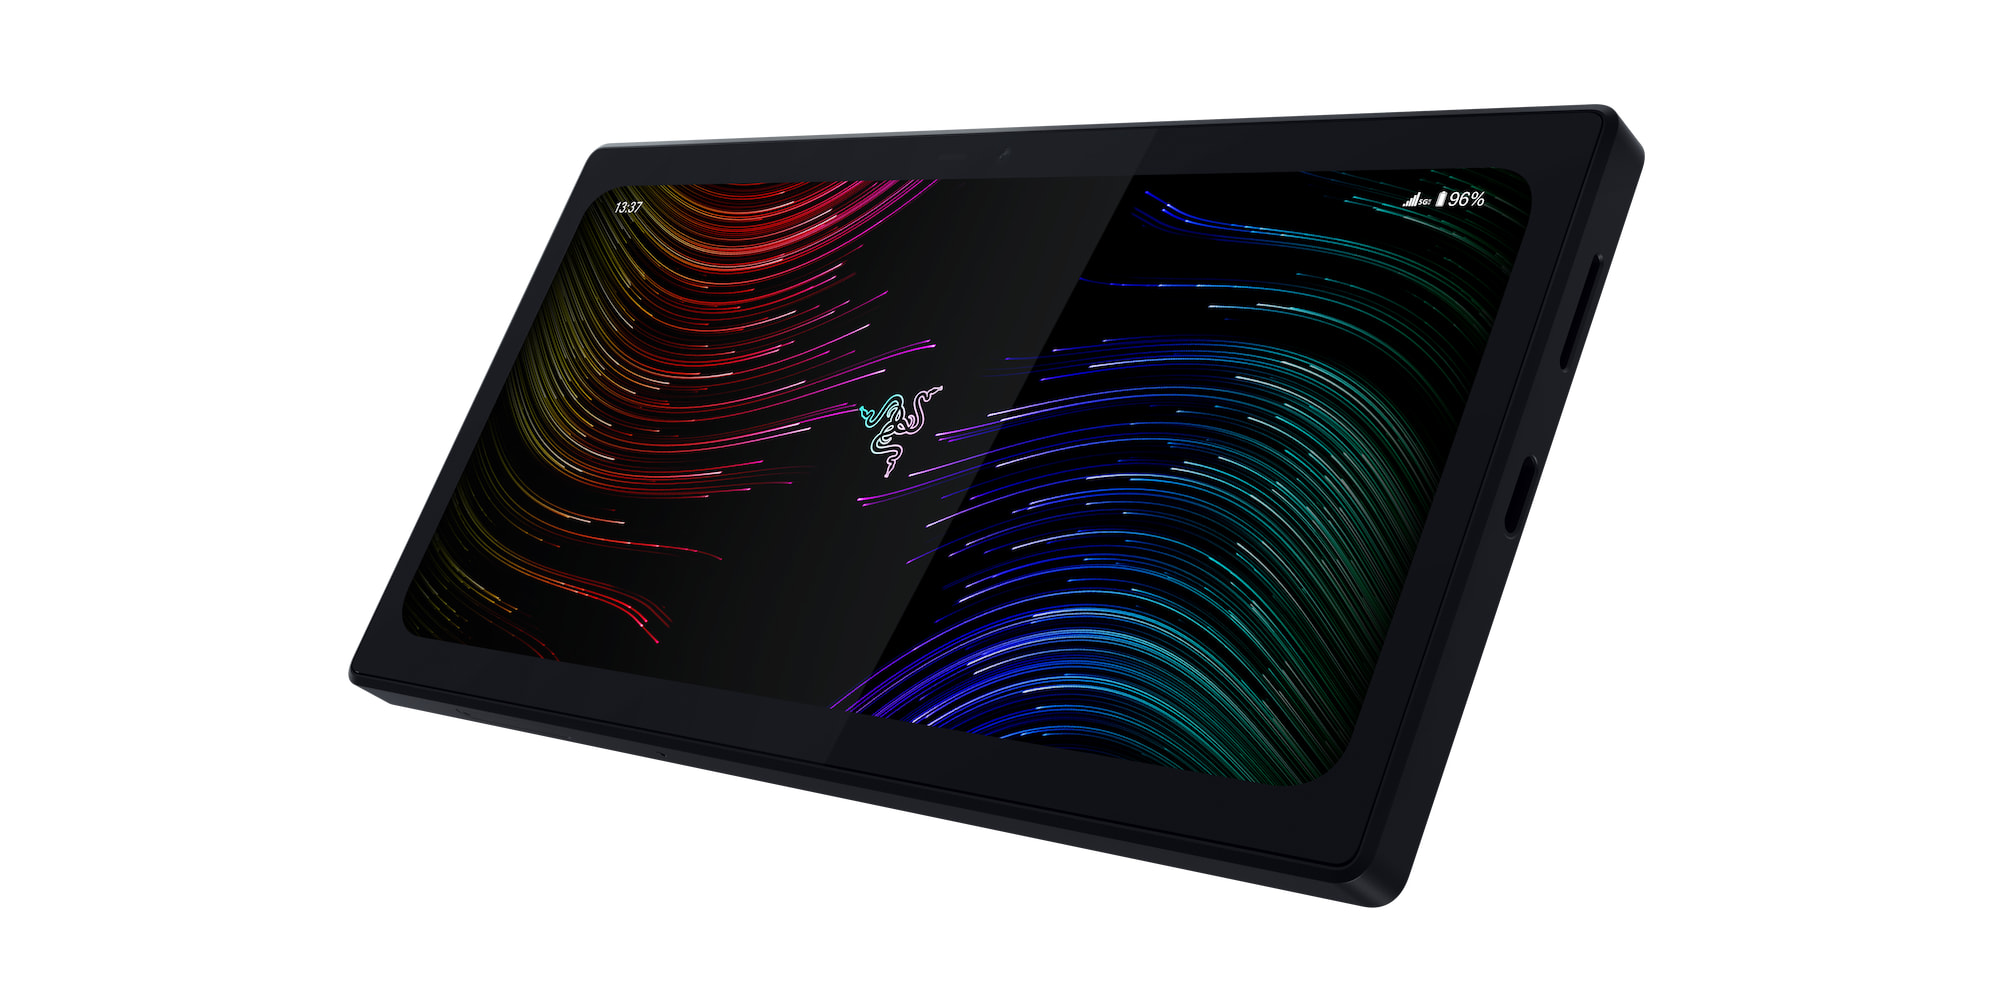 Razer Edge Android gaming tablet w/ detachable controller, $399